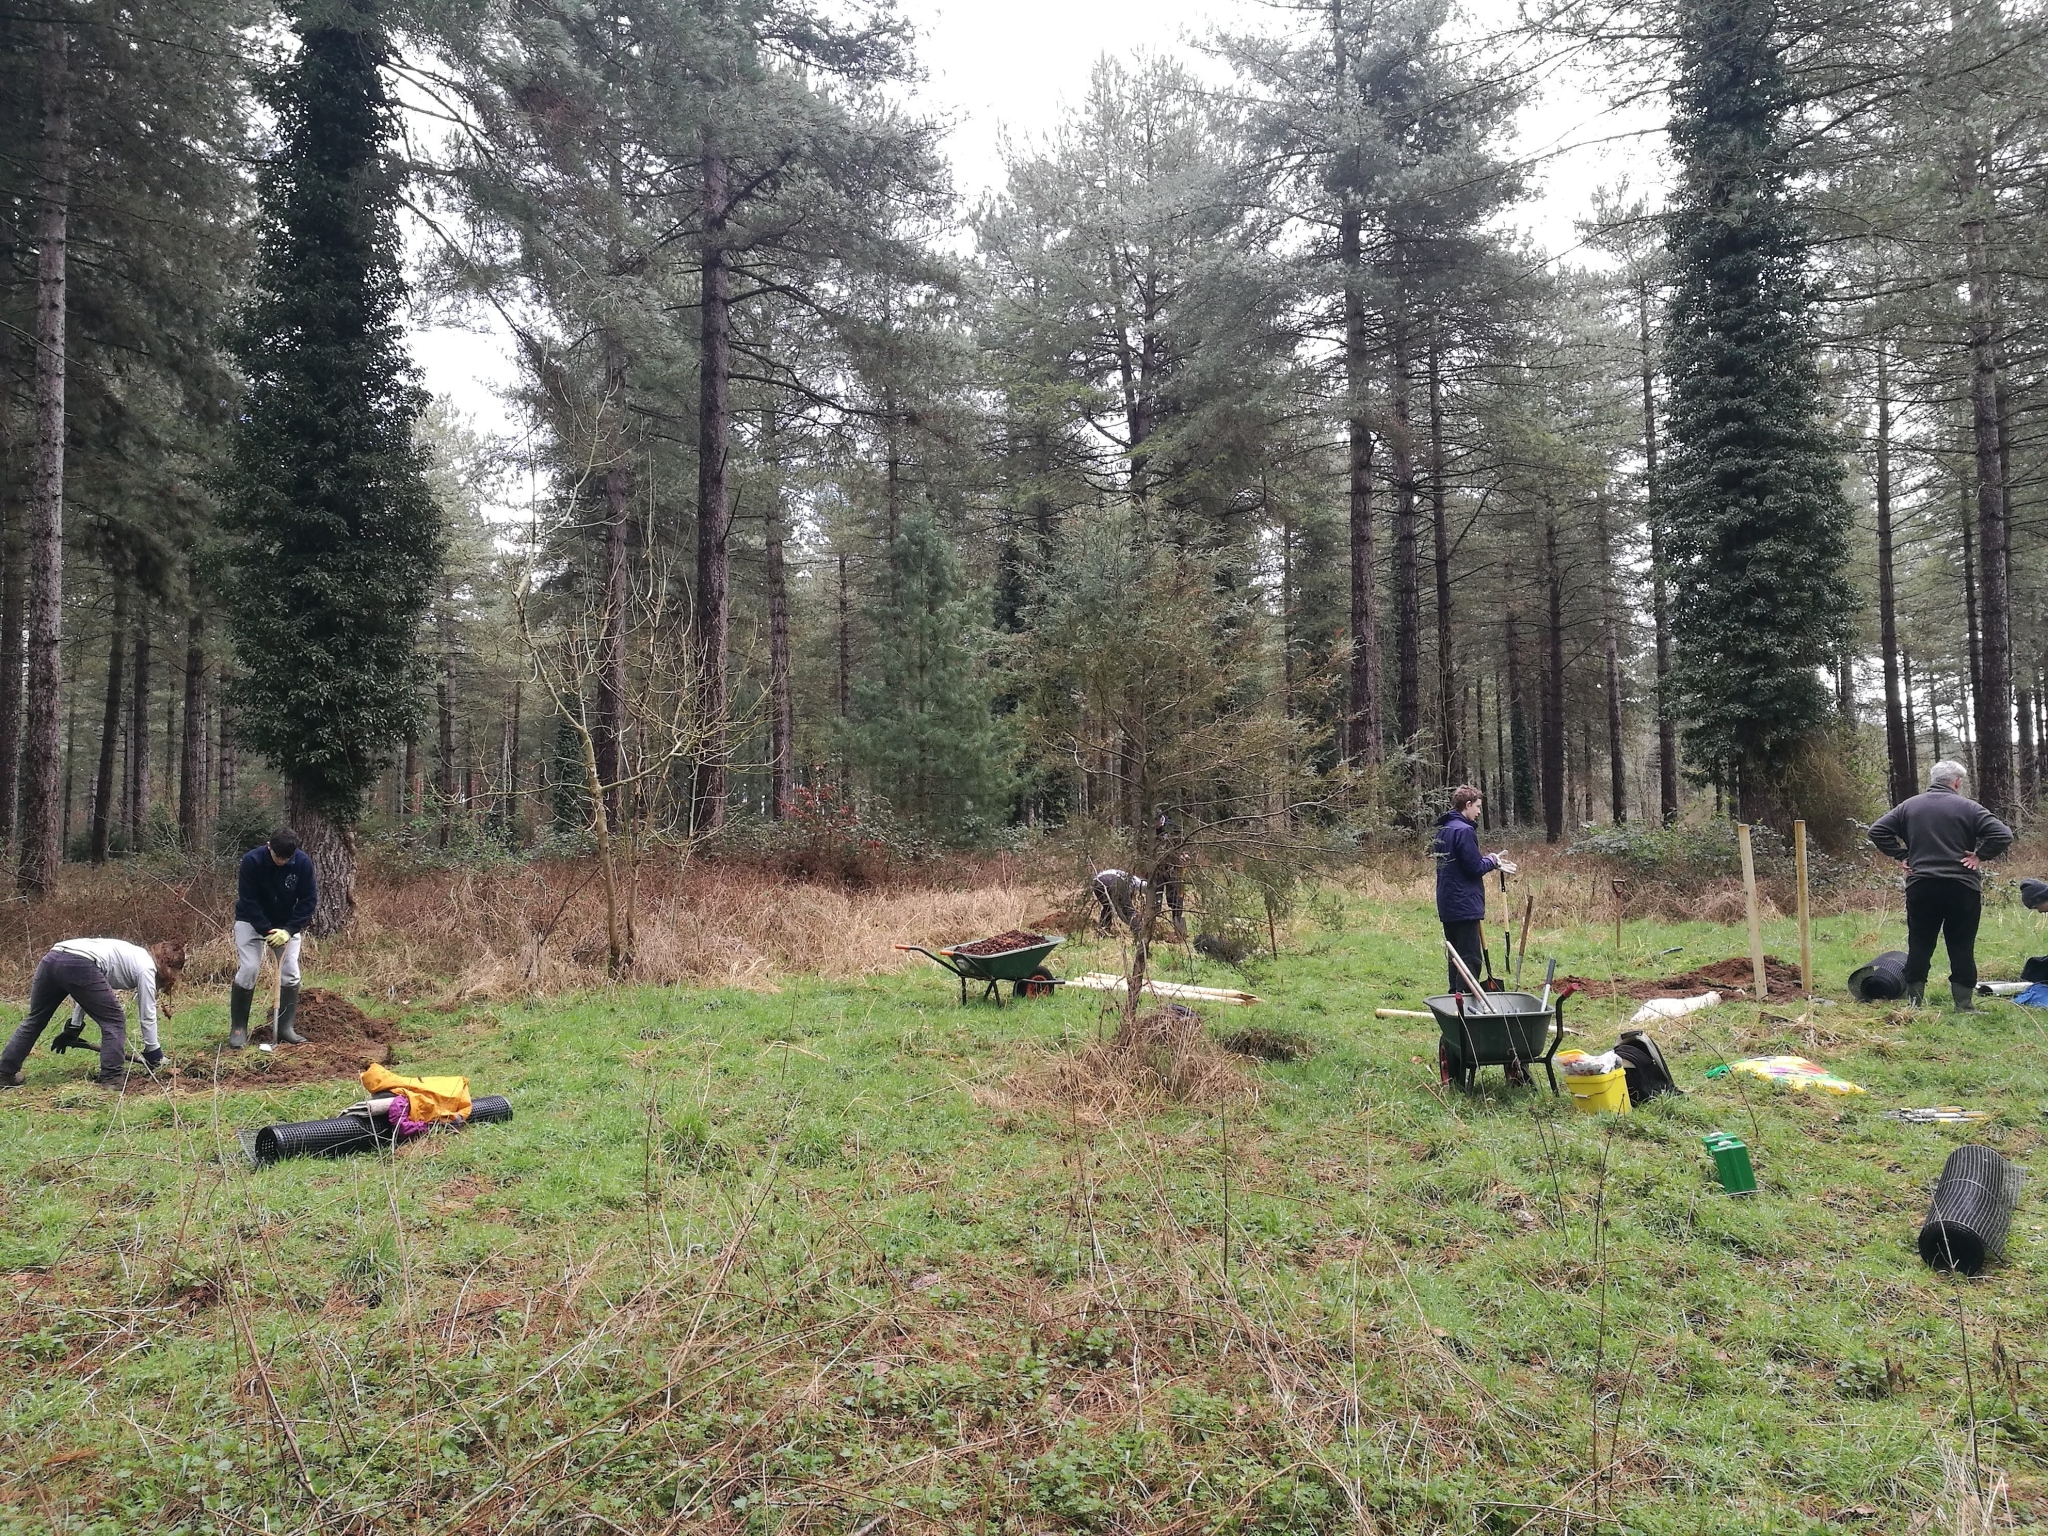 A photo from the FoTF Conservation Event - March 2023 - Tree Planting at Lynford Arboretum : Volunteers digs holes to plant trees